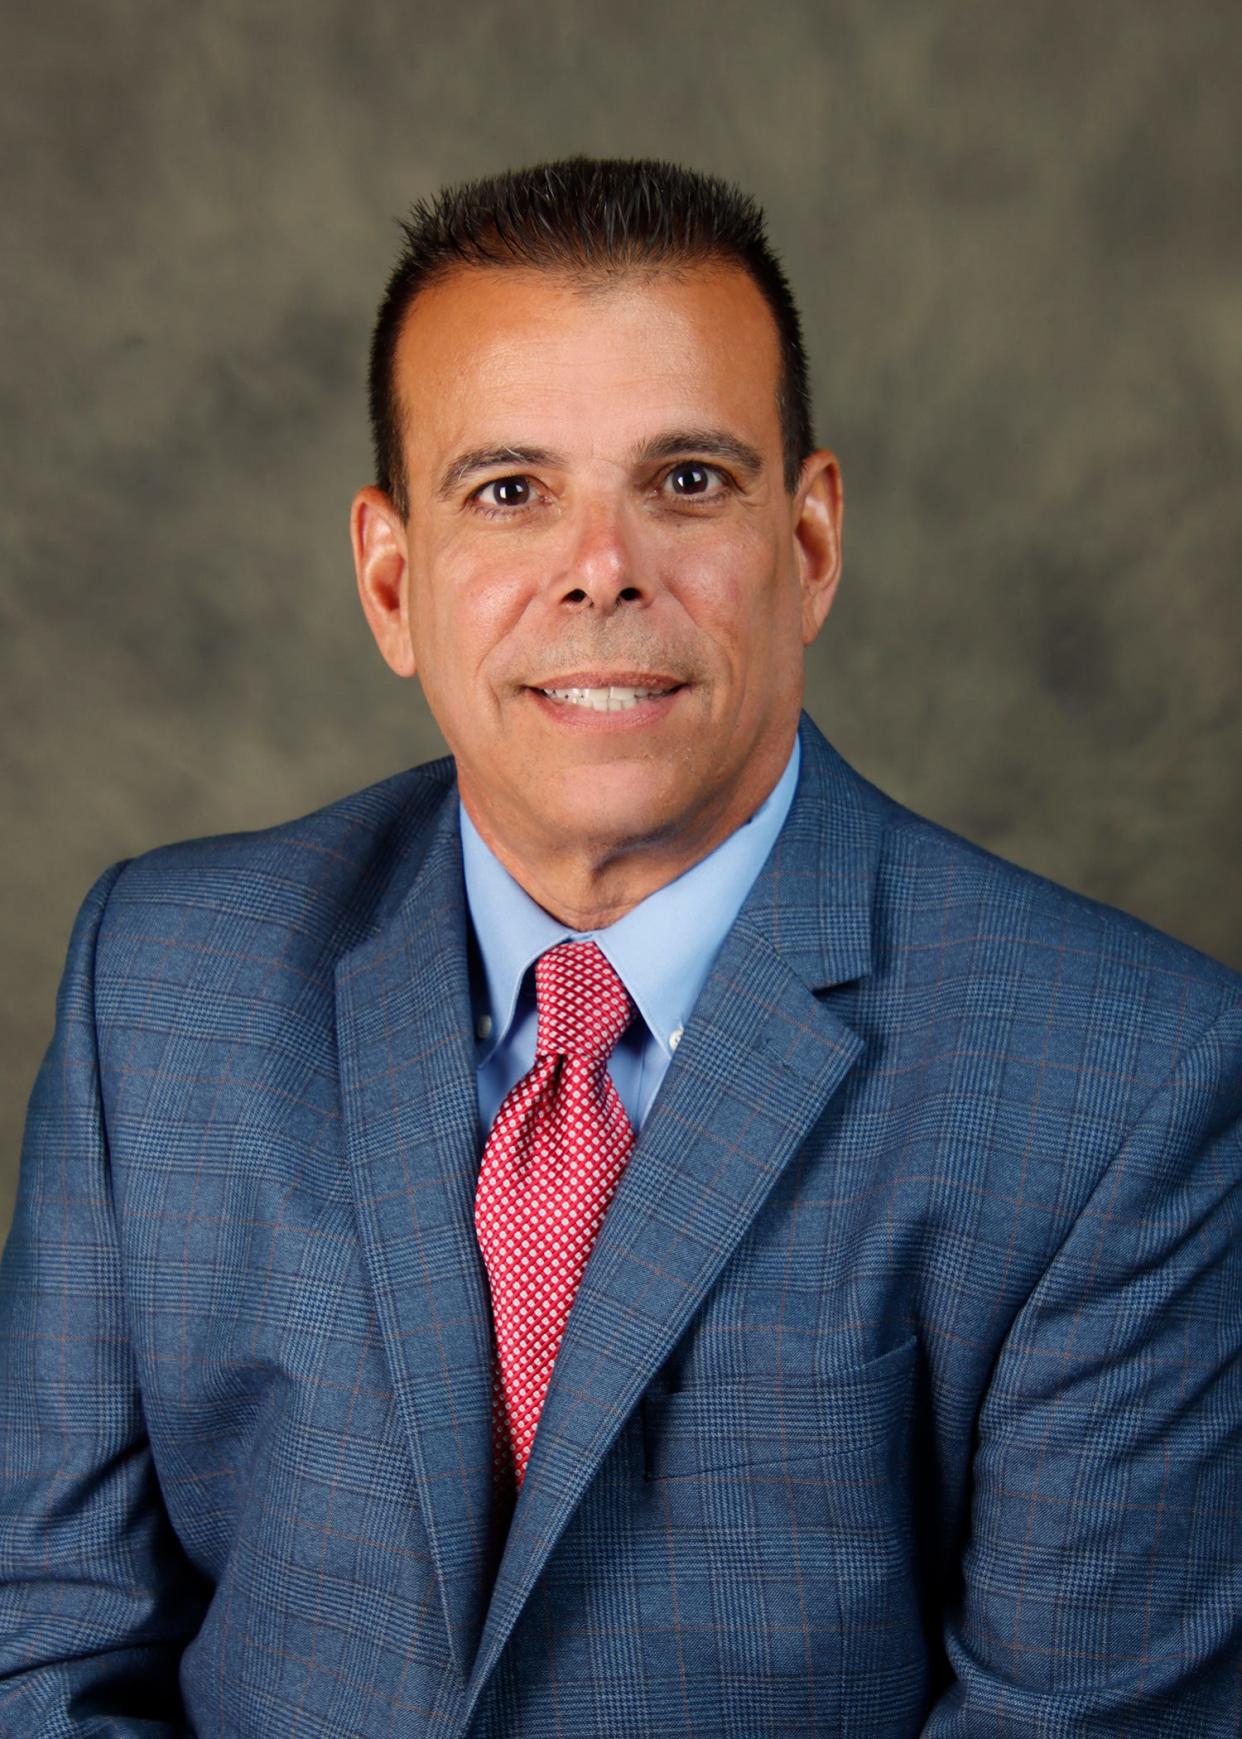 Rob Hernandez has been hired as Lakeland's new assistant city manager starting Monday. He previously served as city manager of Cape Coral, before being terminated under questionable conditions.